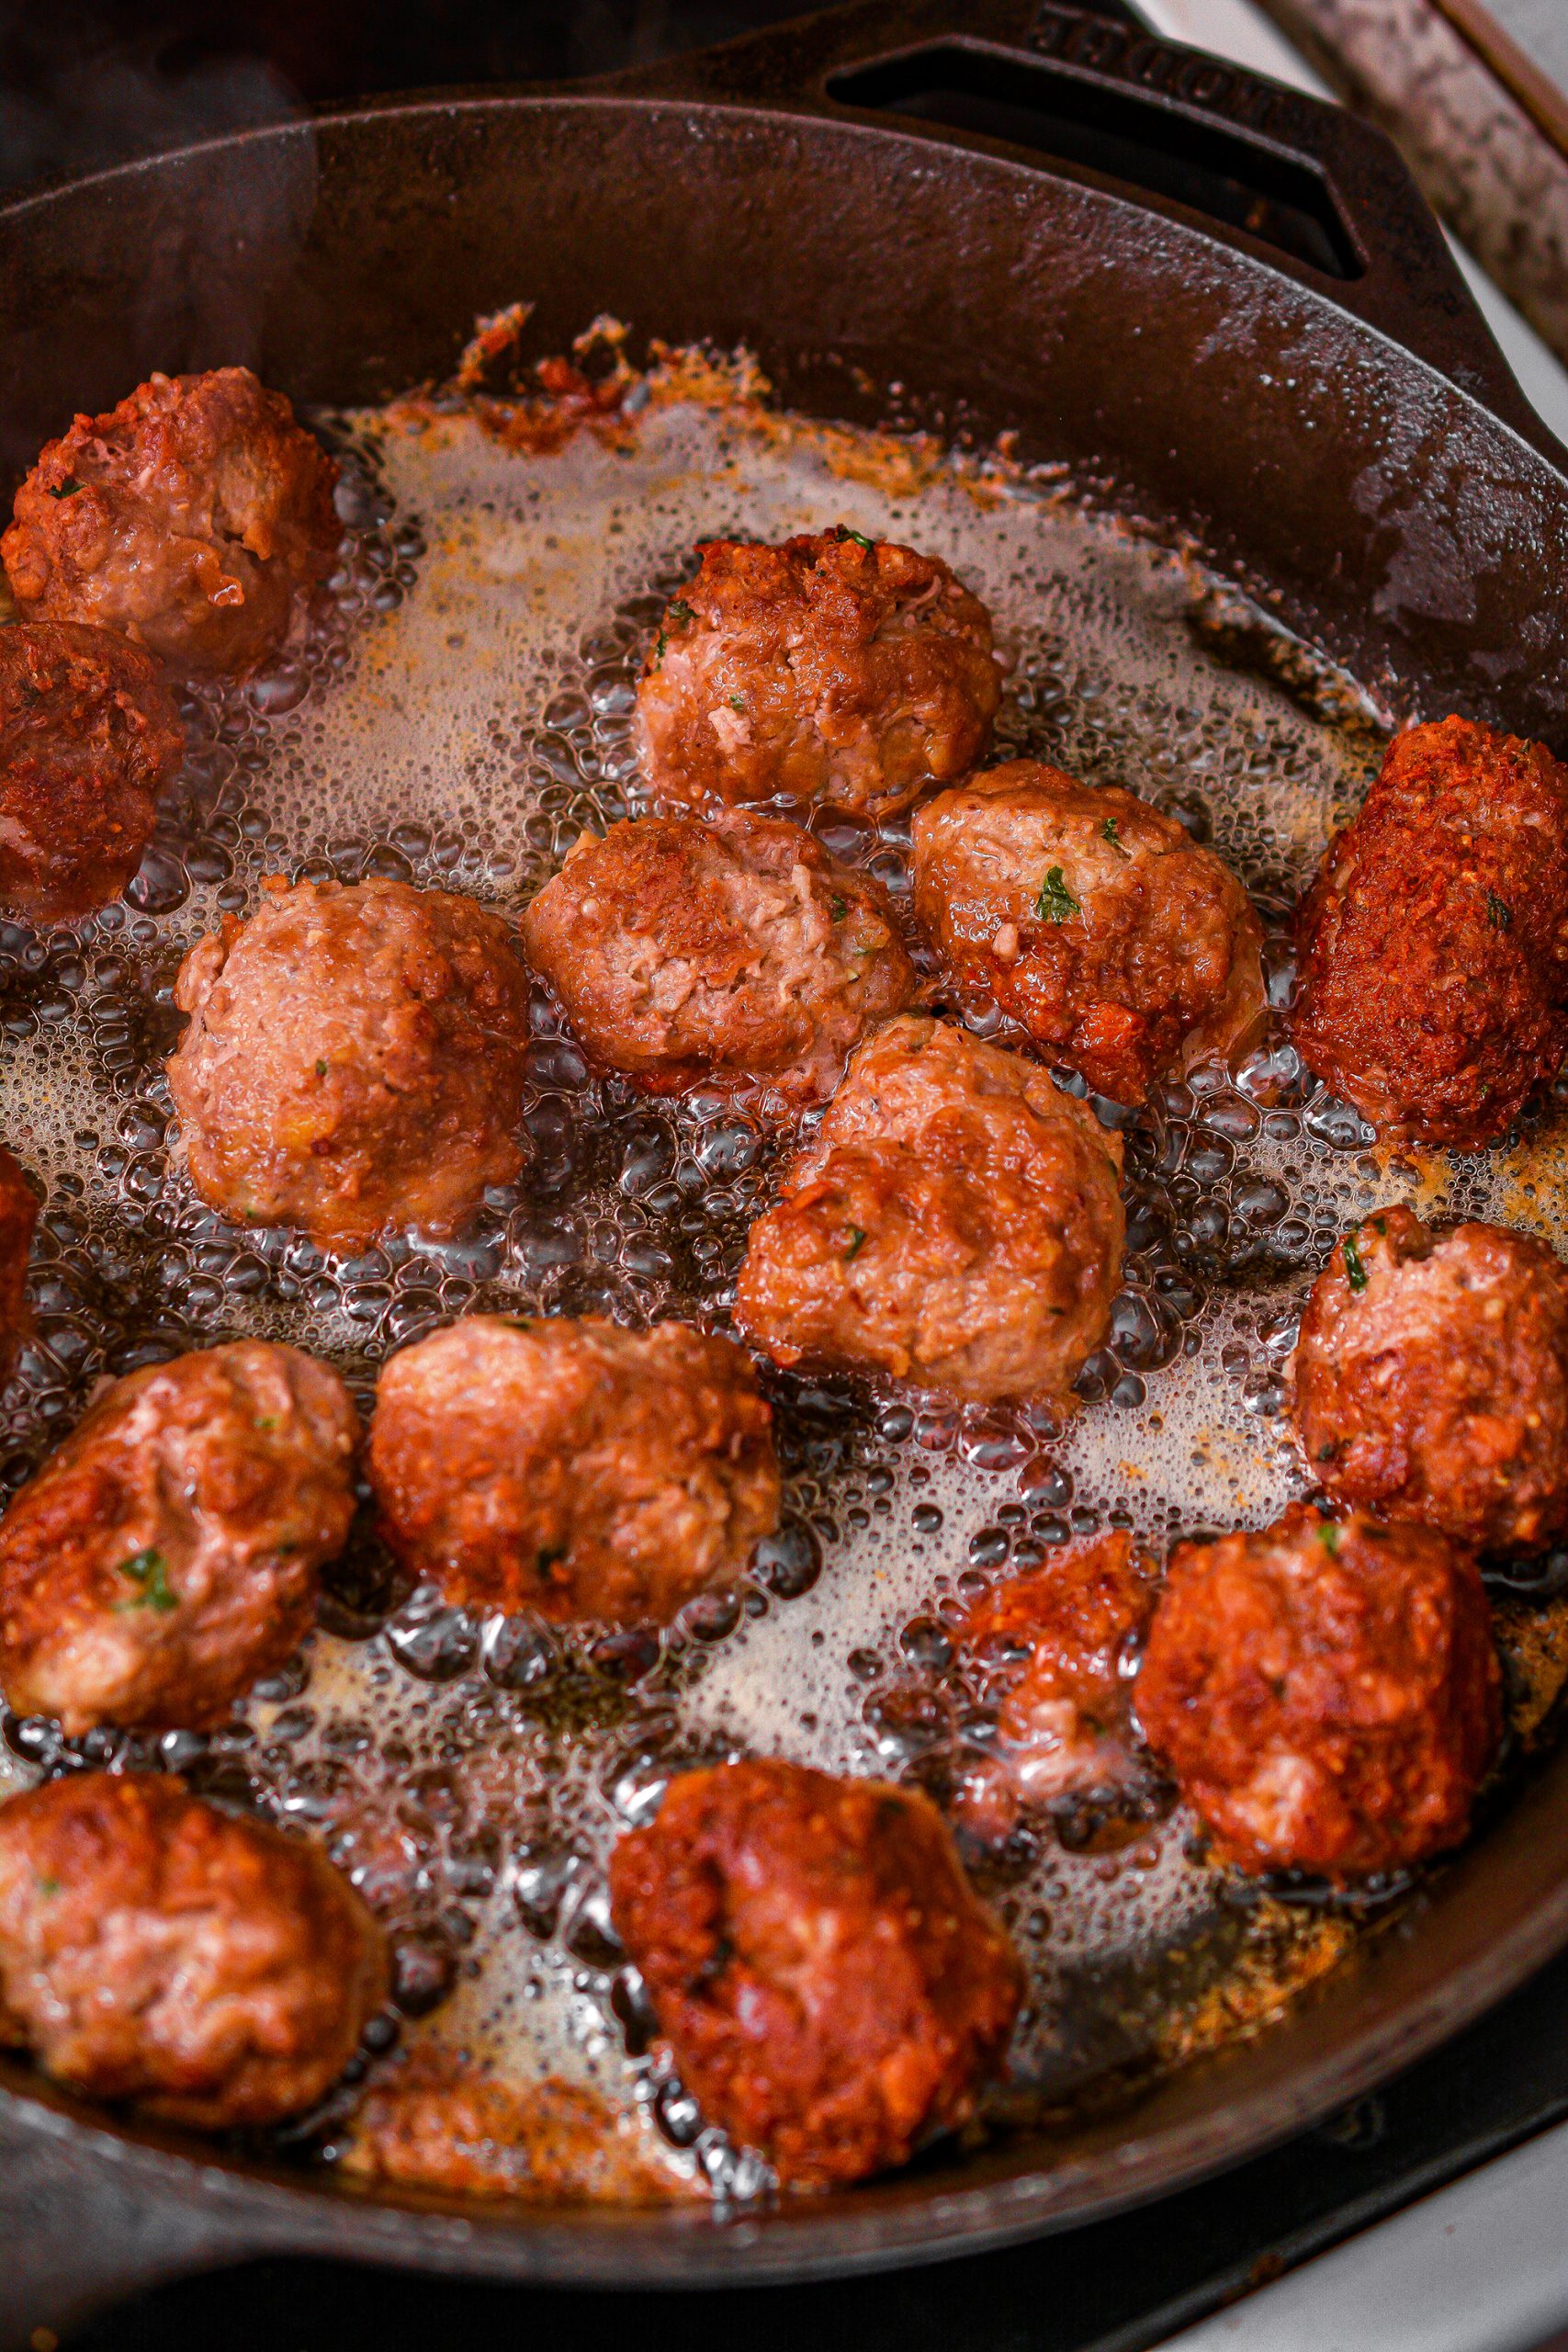 Add the meatballs to the heated oil, frying on all sides until completely cooked through.